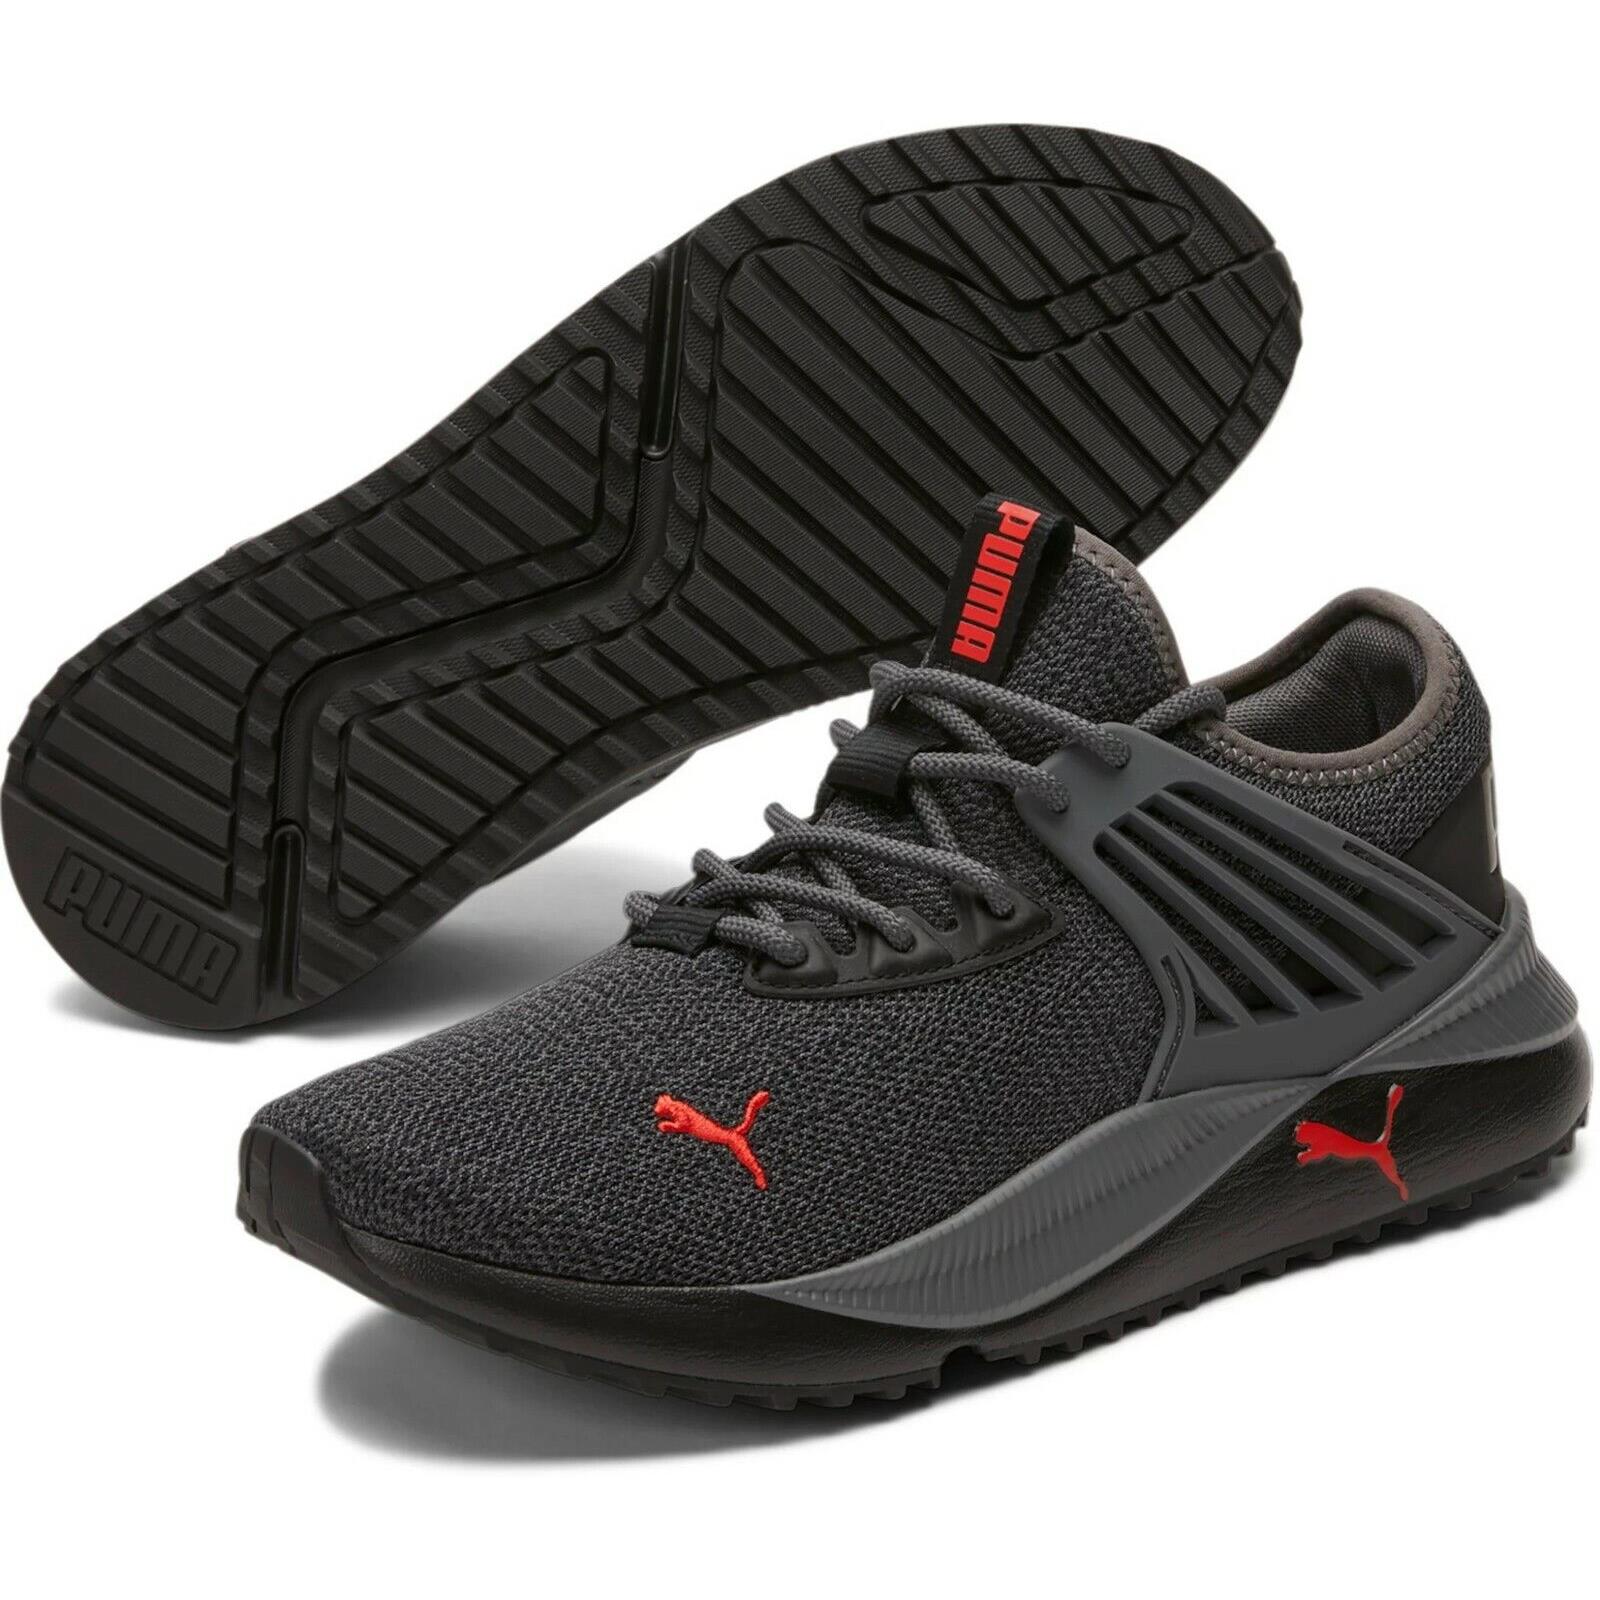 Puma Pacer Future Knit Casual Men`s Shoe Black - Red US Size